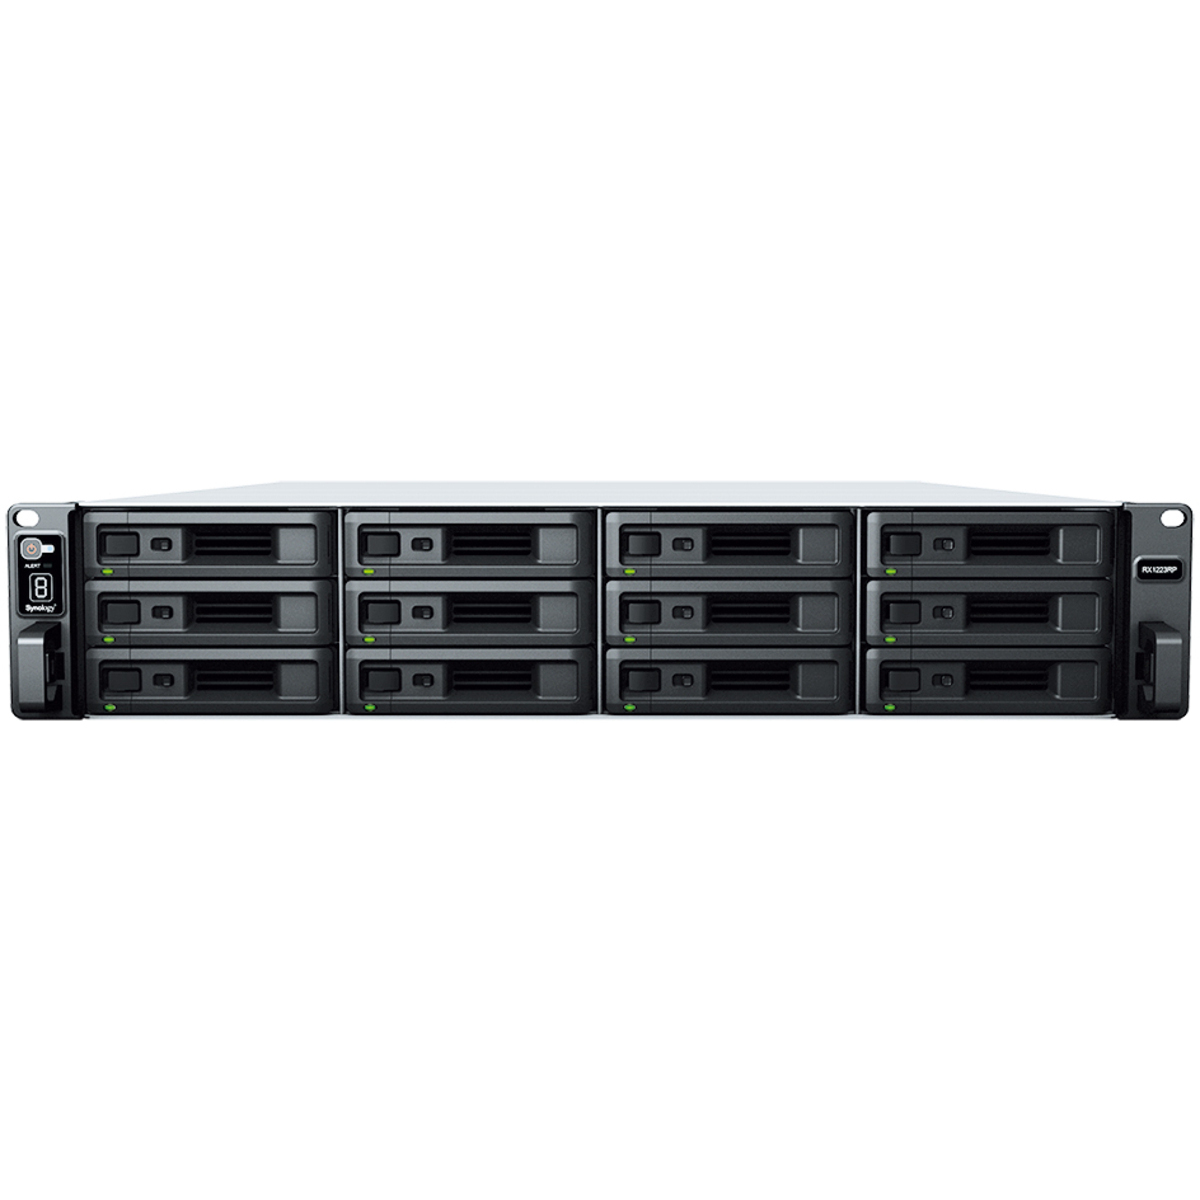 Synology RX1223RP External Expansion Drive 100tb 12-Bay RackMount Large Business / Enterprise Expansion Enclosure 10x10tb Western Digital Red Pro WD102KFBX 3.5 7200rpm SATA 6Gb/s HDD NAS Class Drives Installed - Burn-In Tested RX1223RP External Expansion Drive